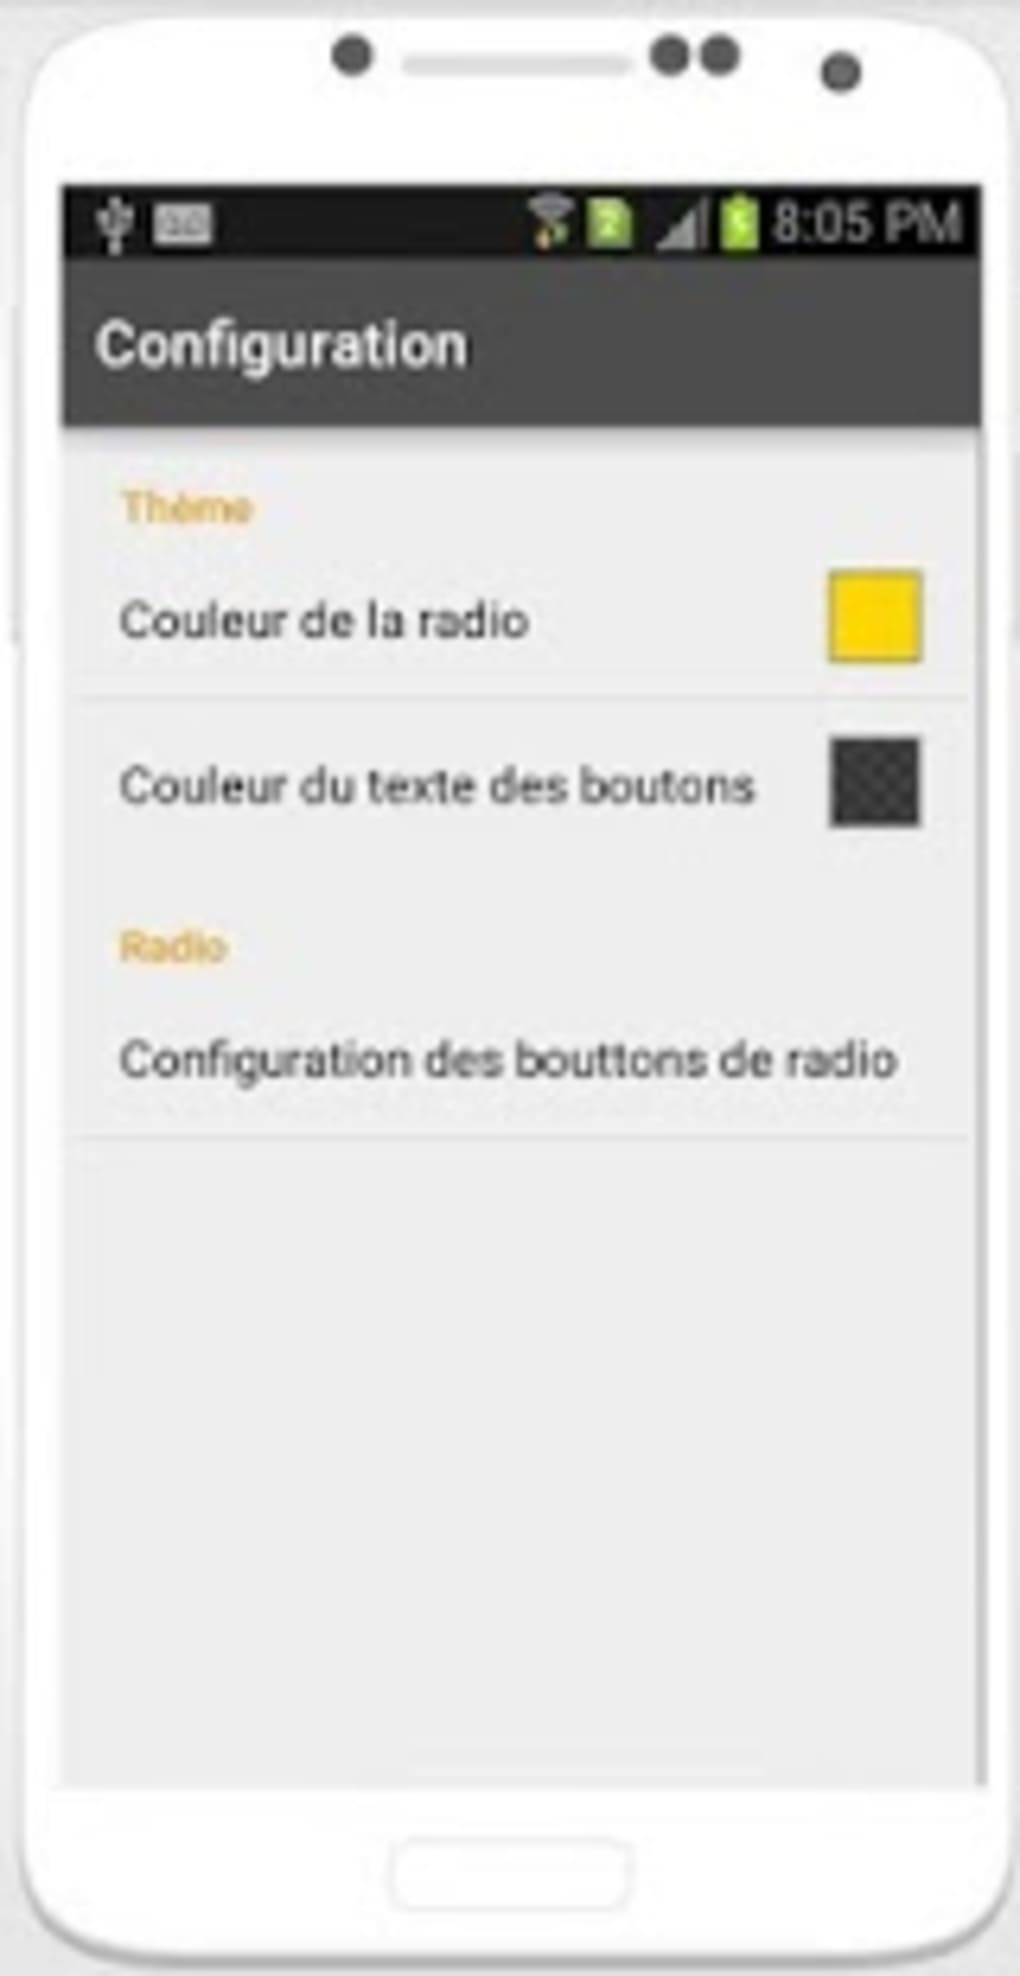 Download brila fm app for android phone